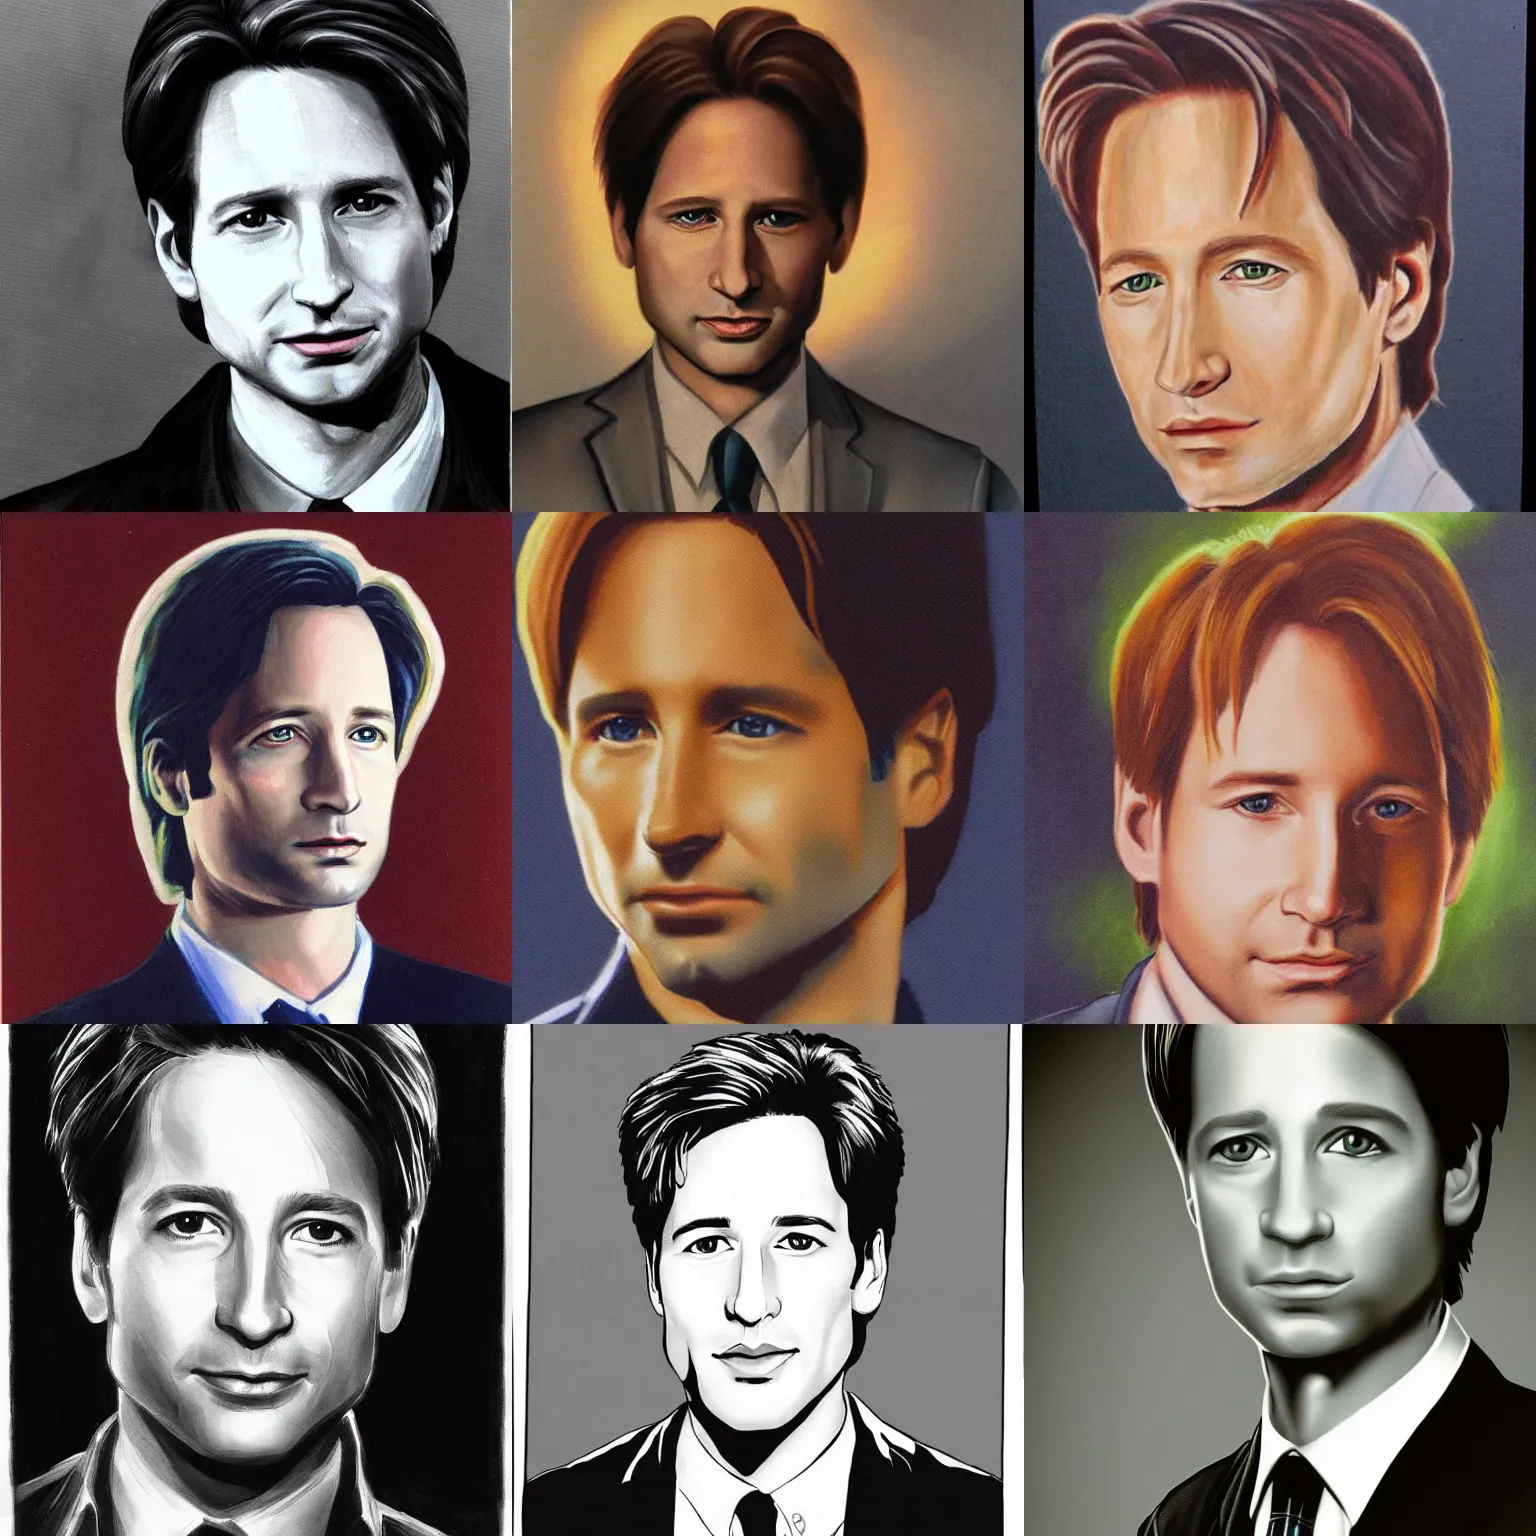 Prompt: detailed portrait of young fox mulder in x - files